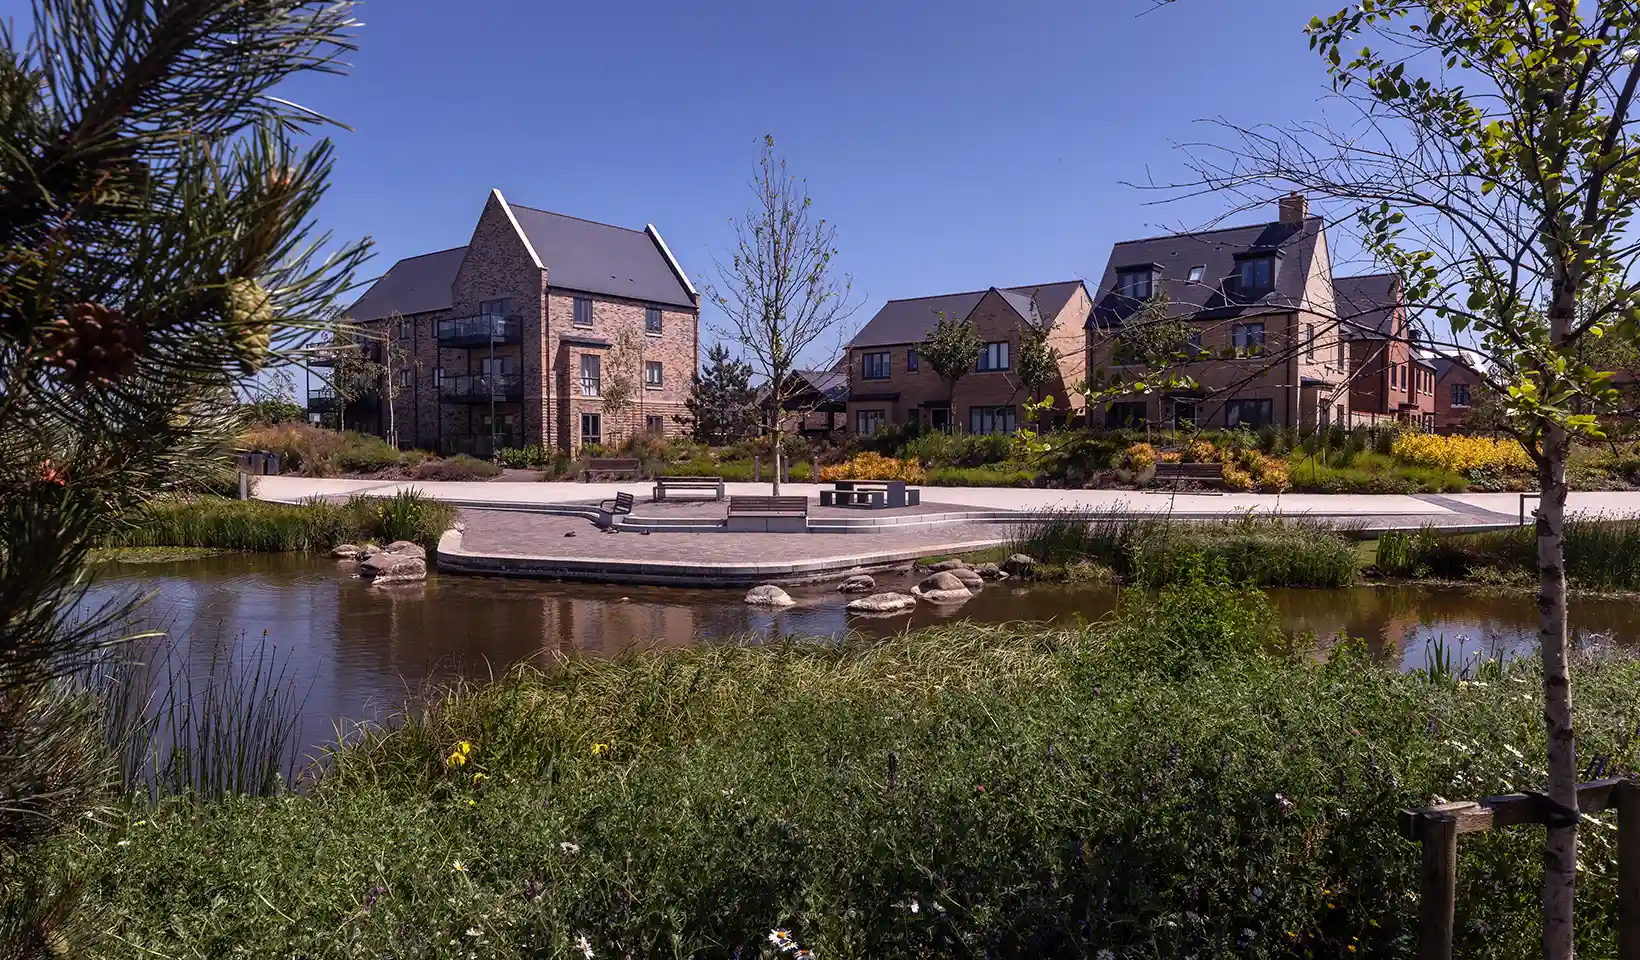 New homes overlooking Bret Pond at Wintringham St Neots